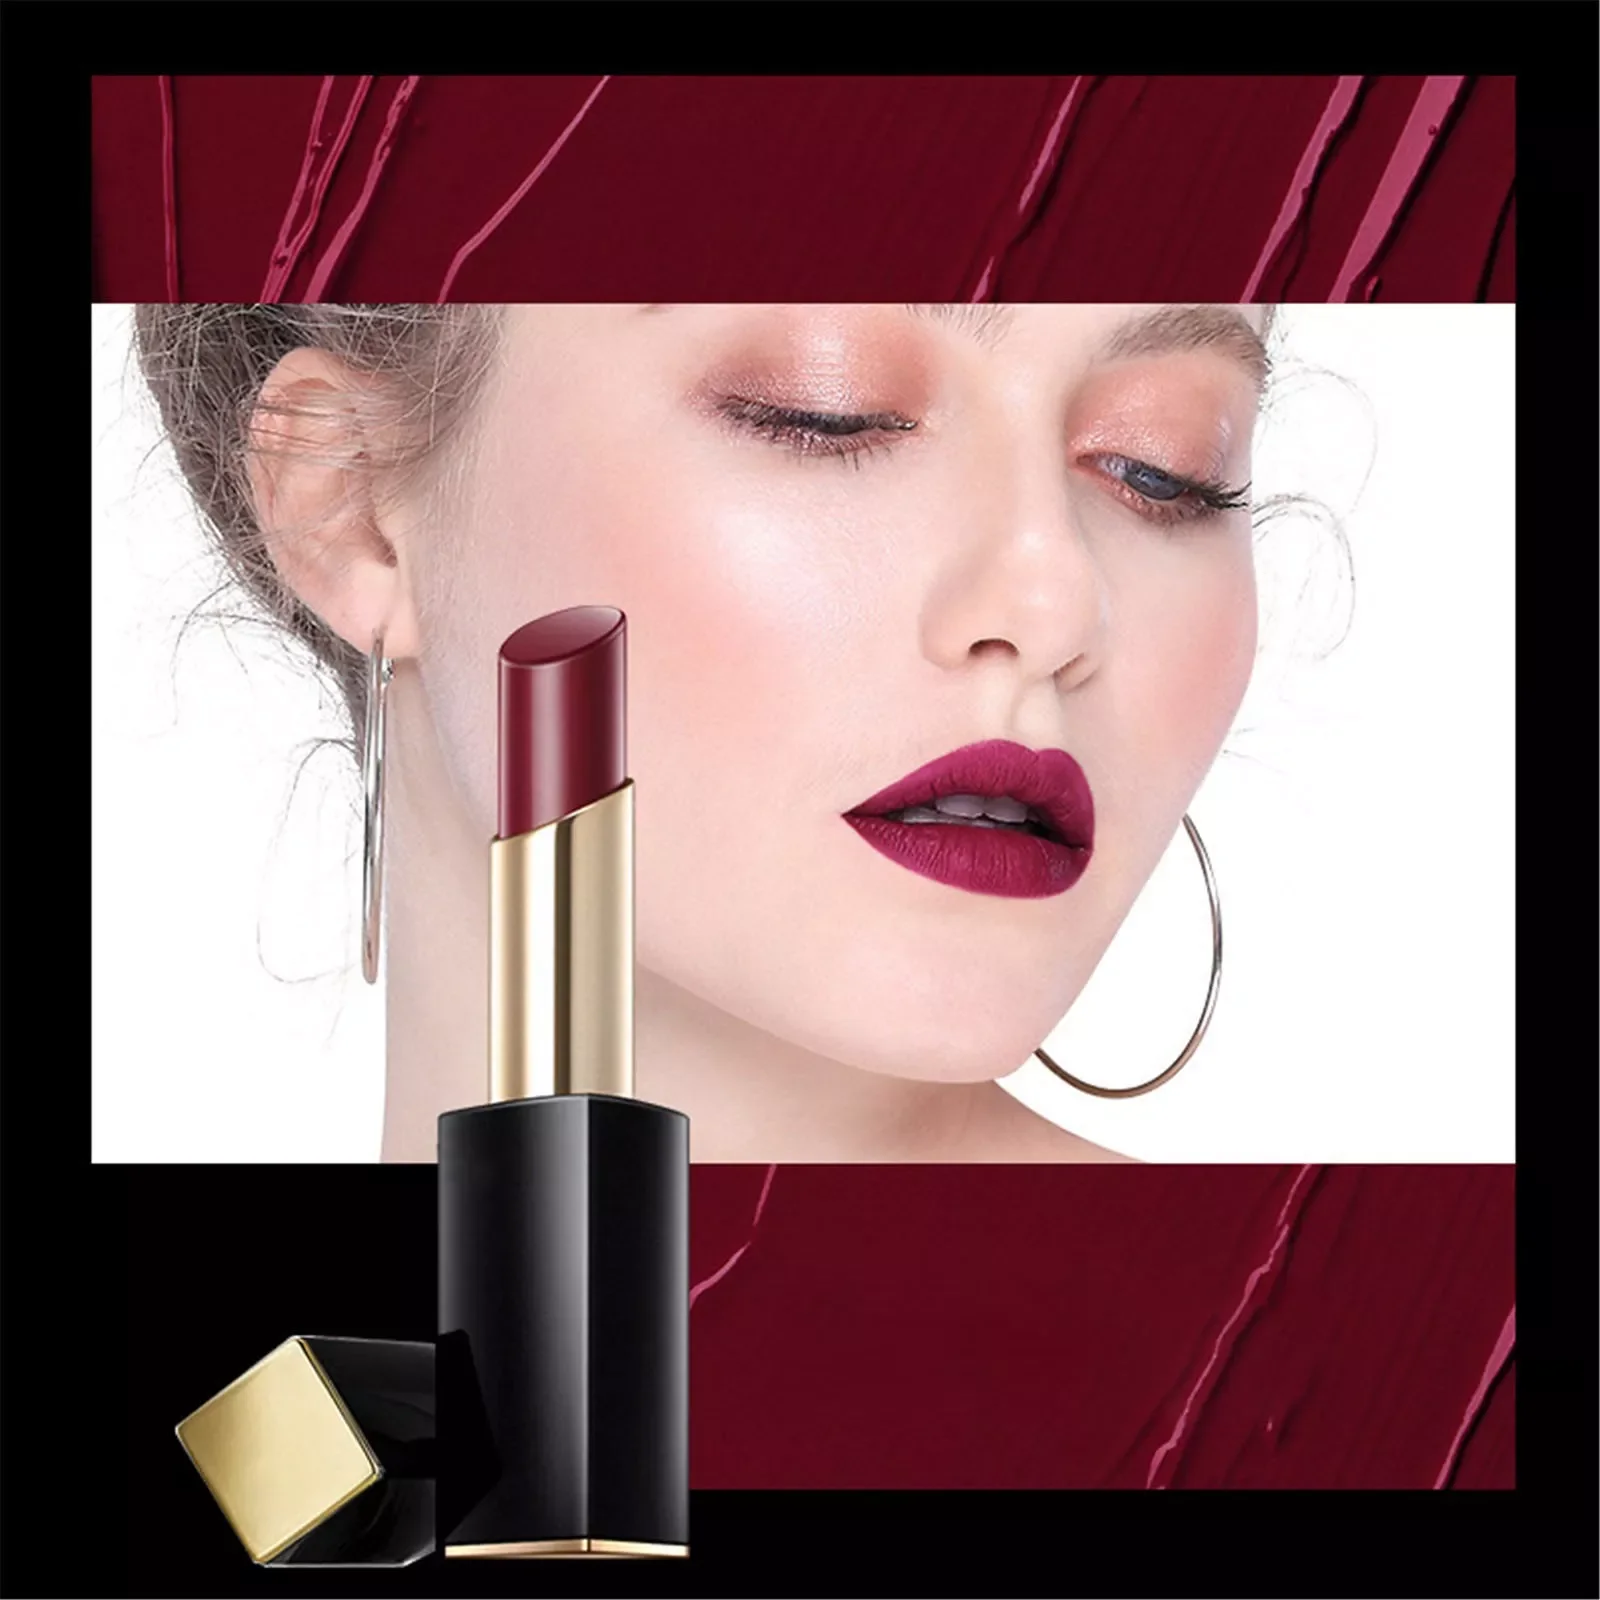 

NEW2023 Vegan Lipstick Lipstick With Lip Balm Makeup Set Velvet Long Lasting High Pigment Nude Star Lipstick Wine Wipes for And